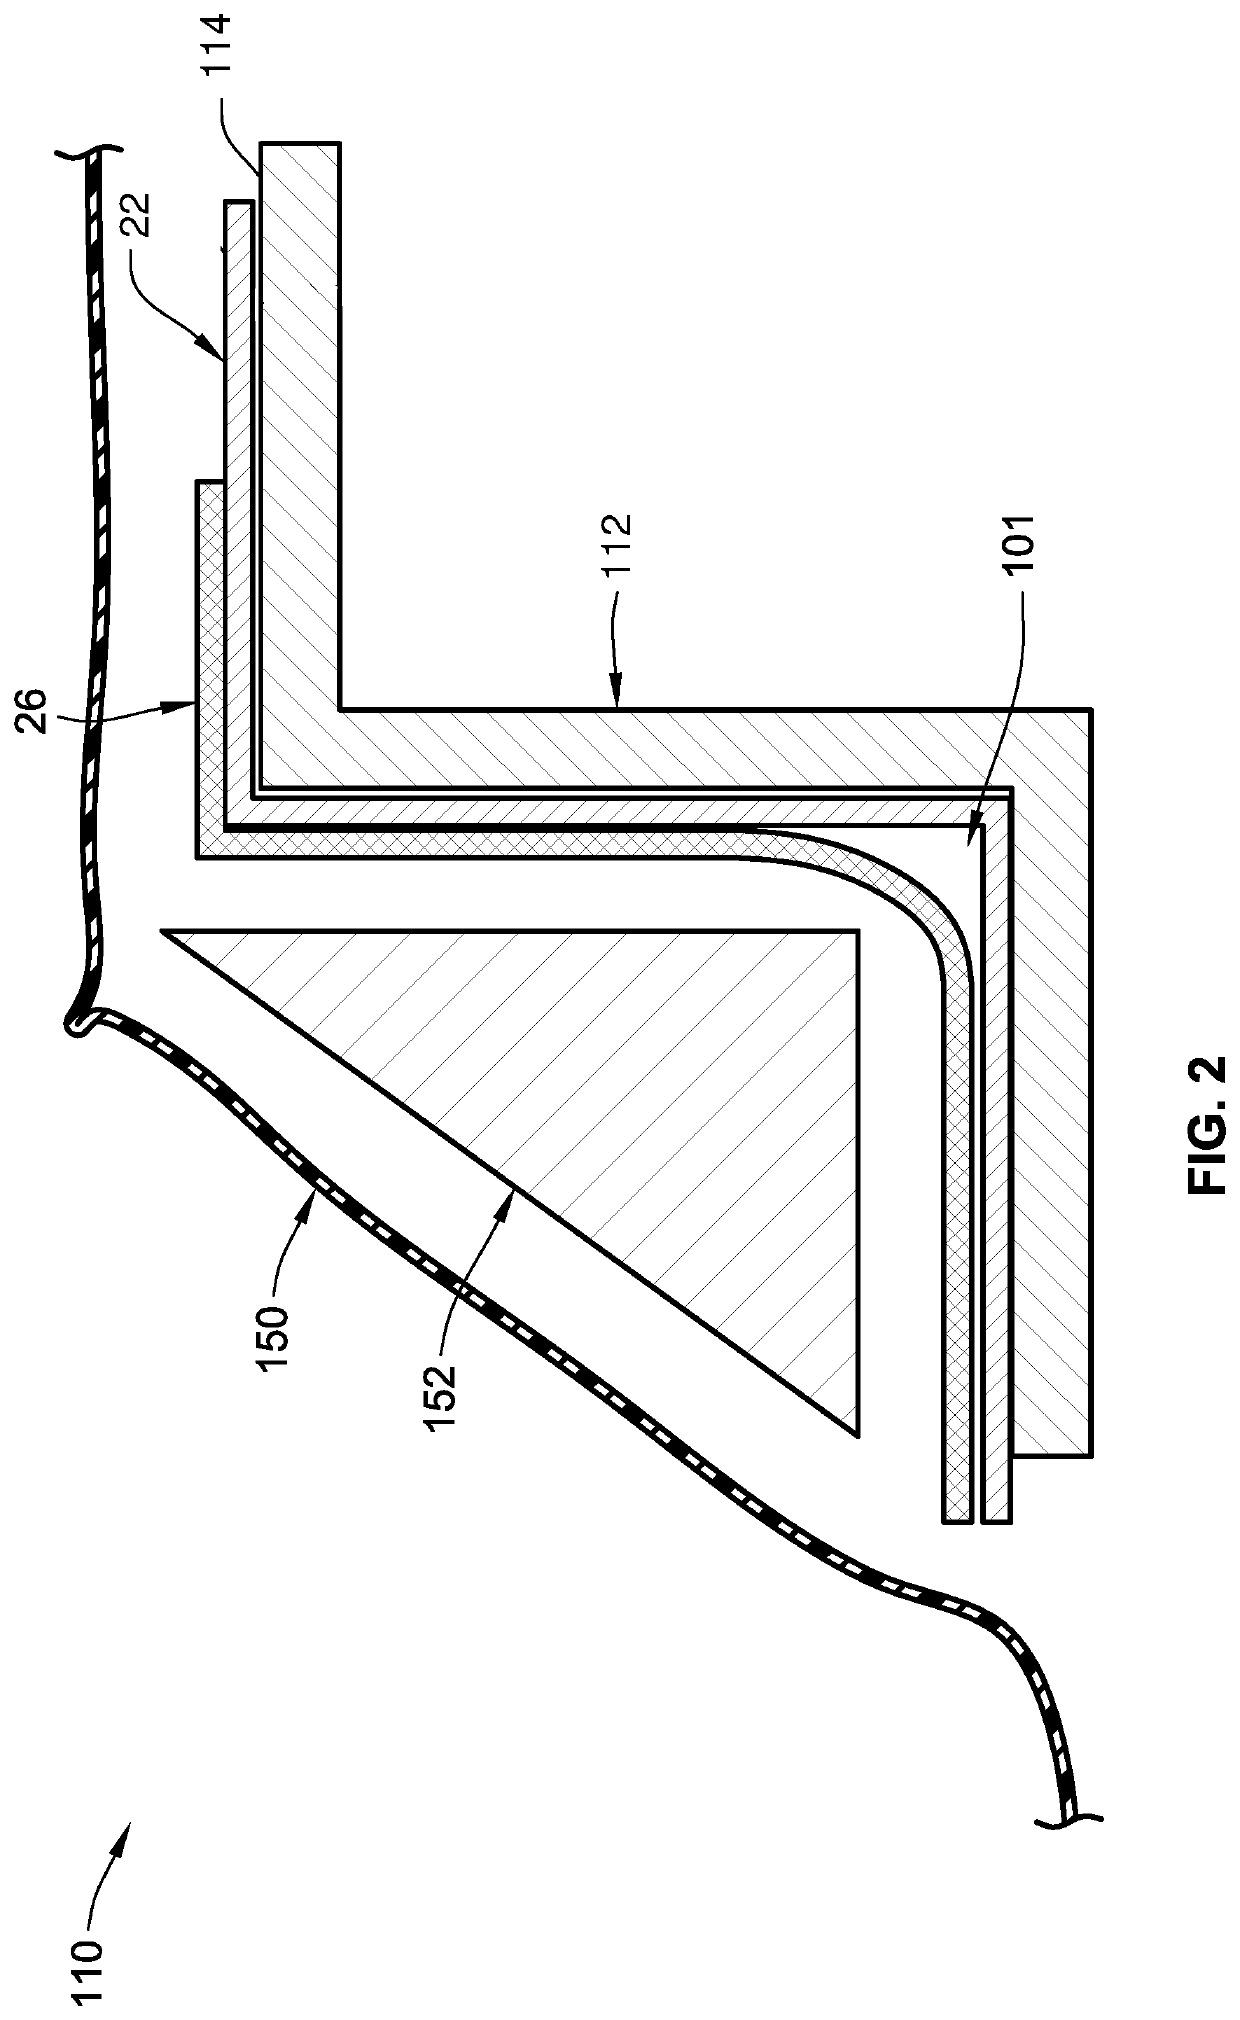 Systems and processes for repairing fiber-reinforced polymer structures